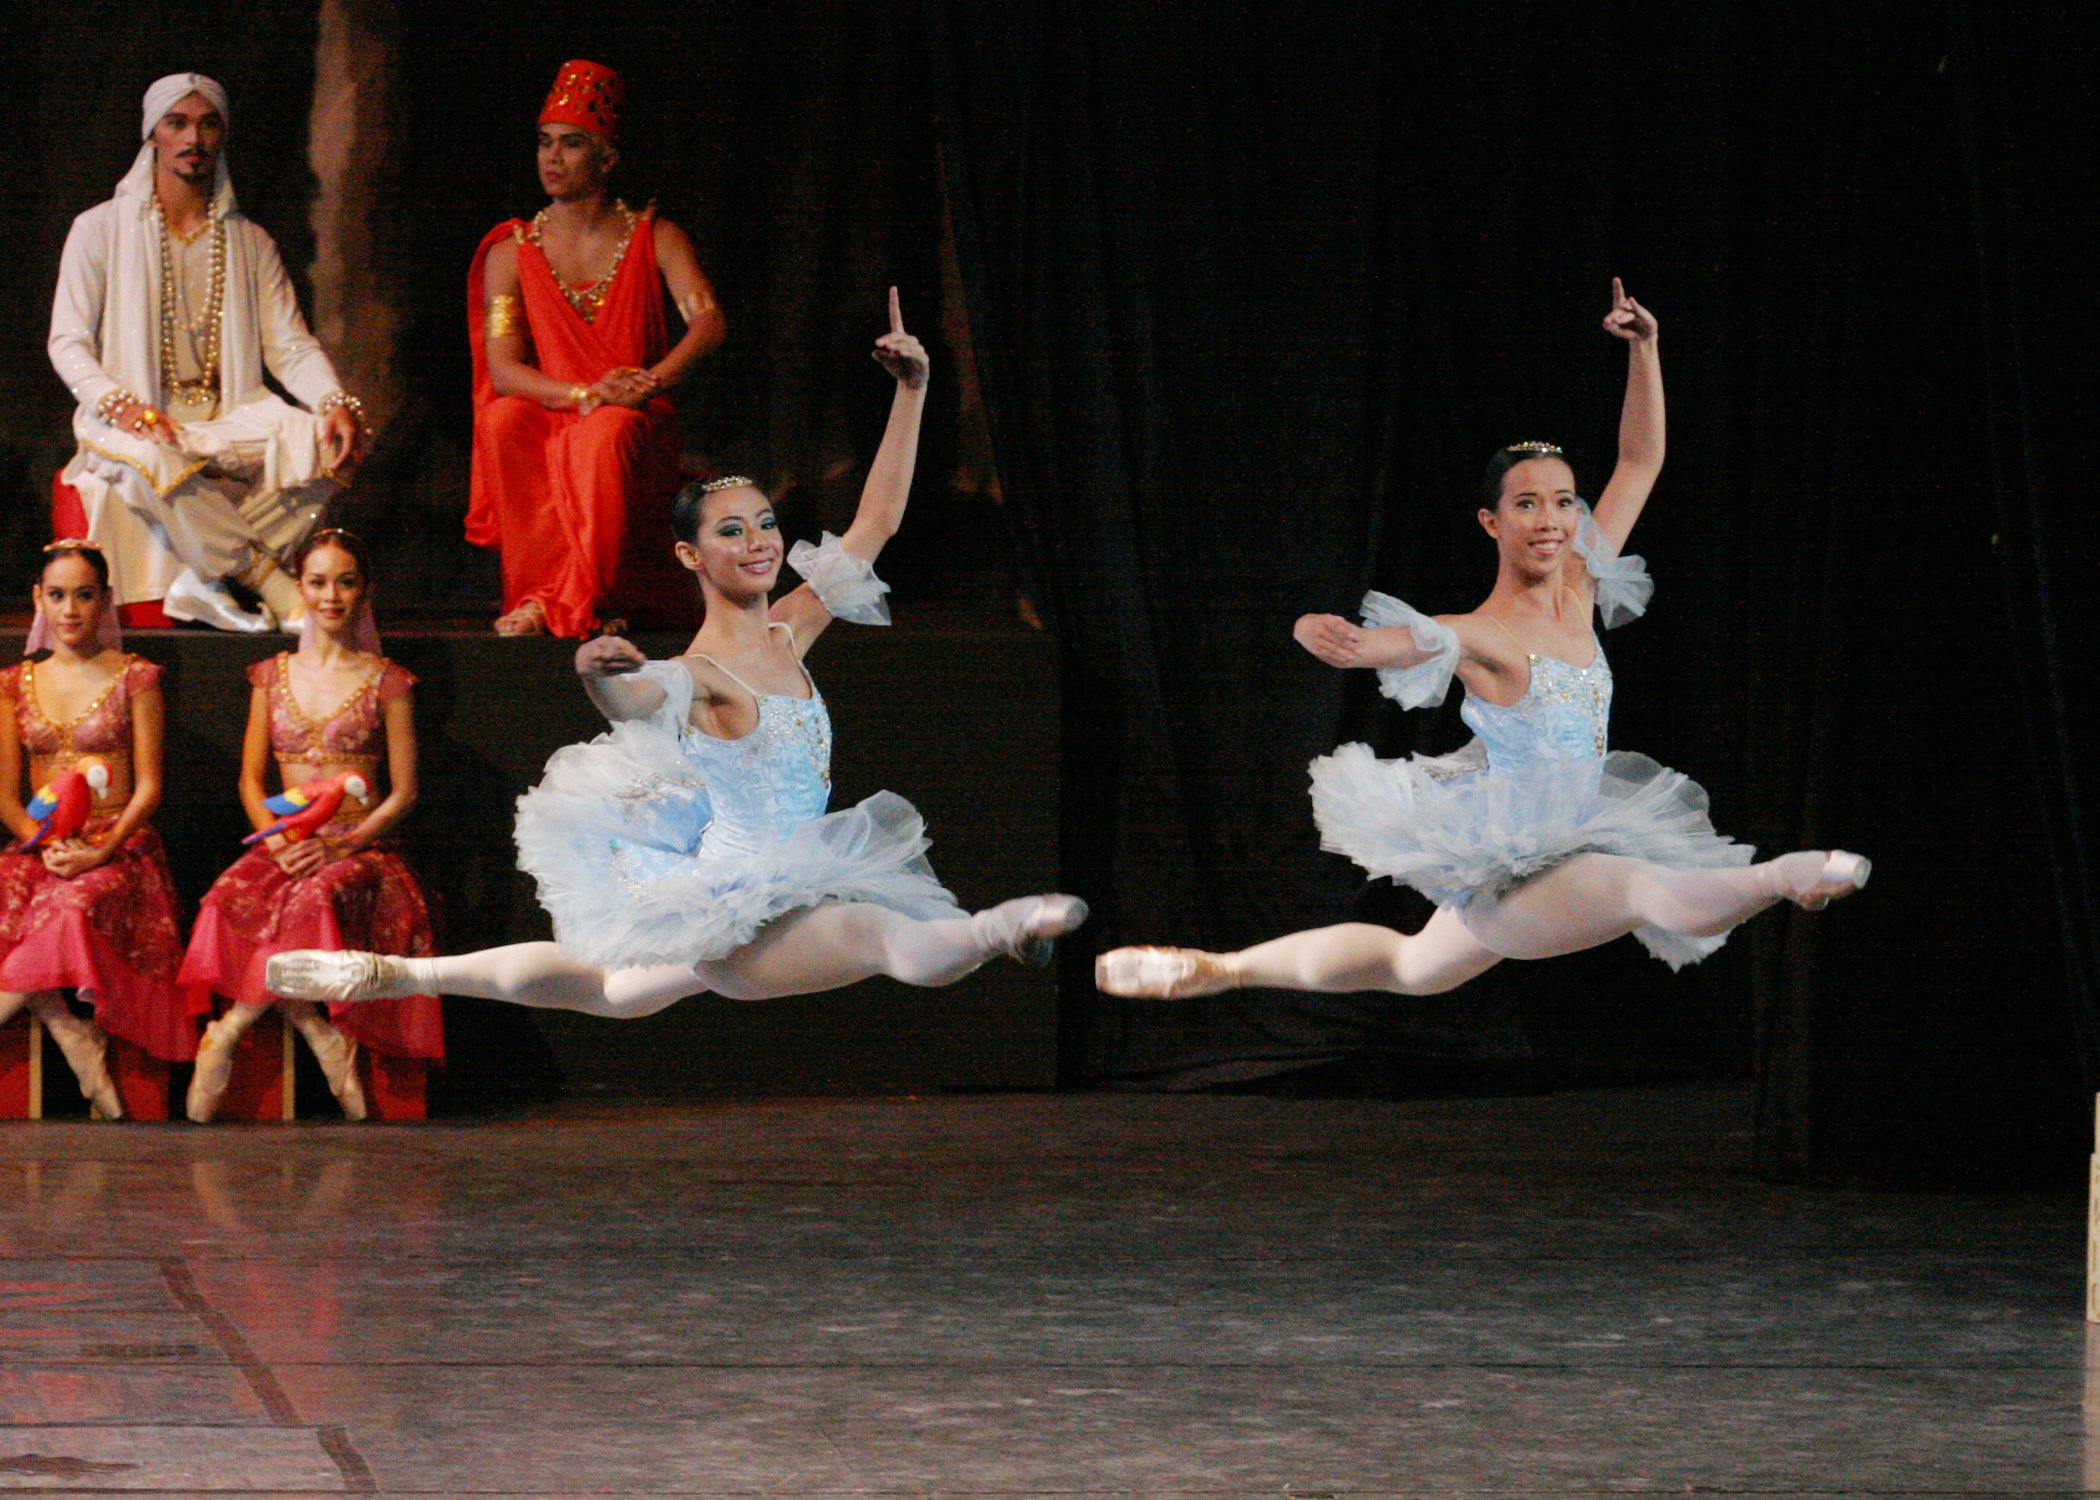    In the Pas D’Action of the Grand Pas de Deux in  La Bayadere  (2004), the powder blue tutus of the corps de ballet (as seen here on Zaira Cosico and Eileen Lopez) contrast starkly with the bold colors of the High Brahmin and the Parrots in the bac